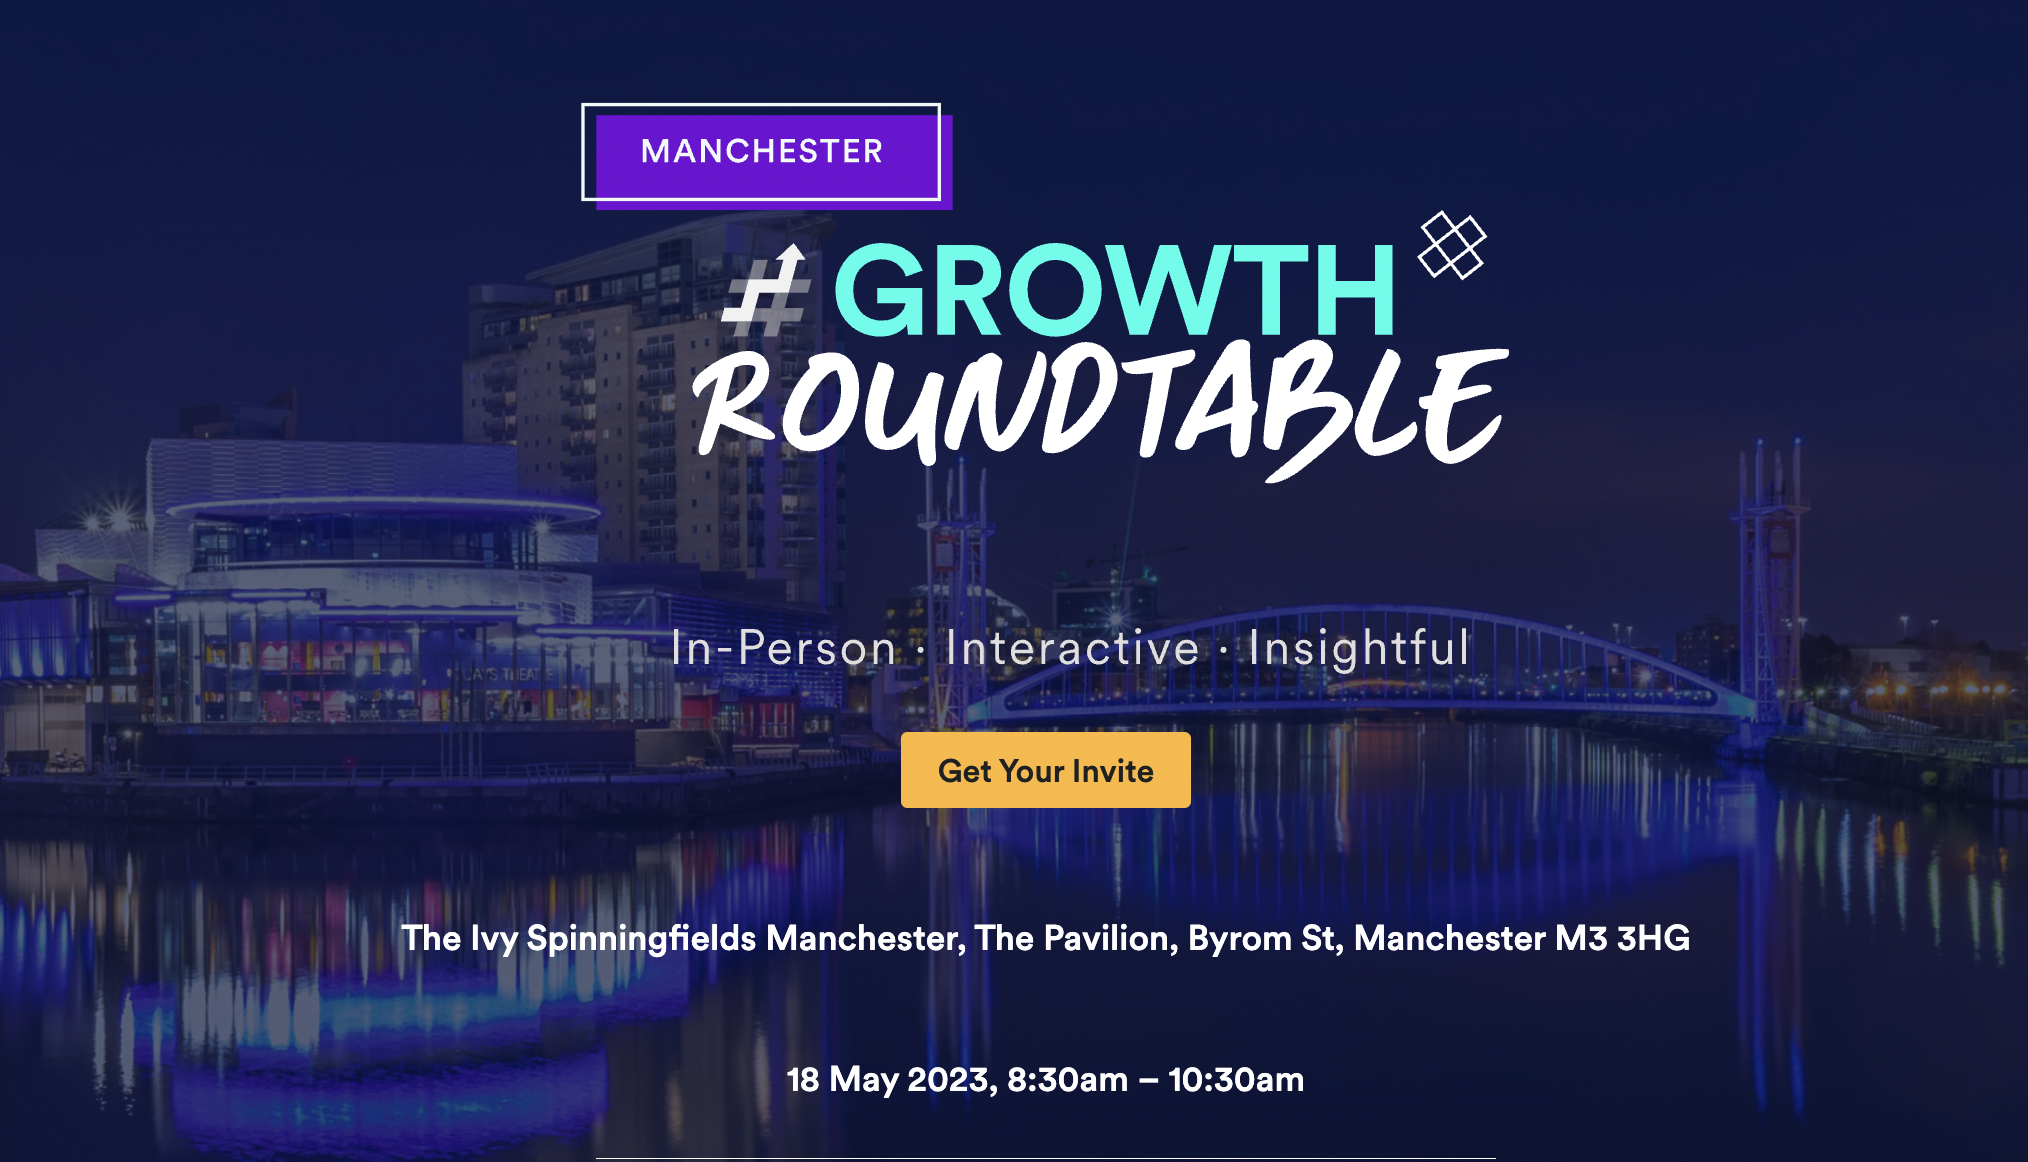 #GROWTH Roundtable 2023 Manchester